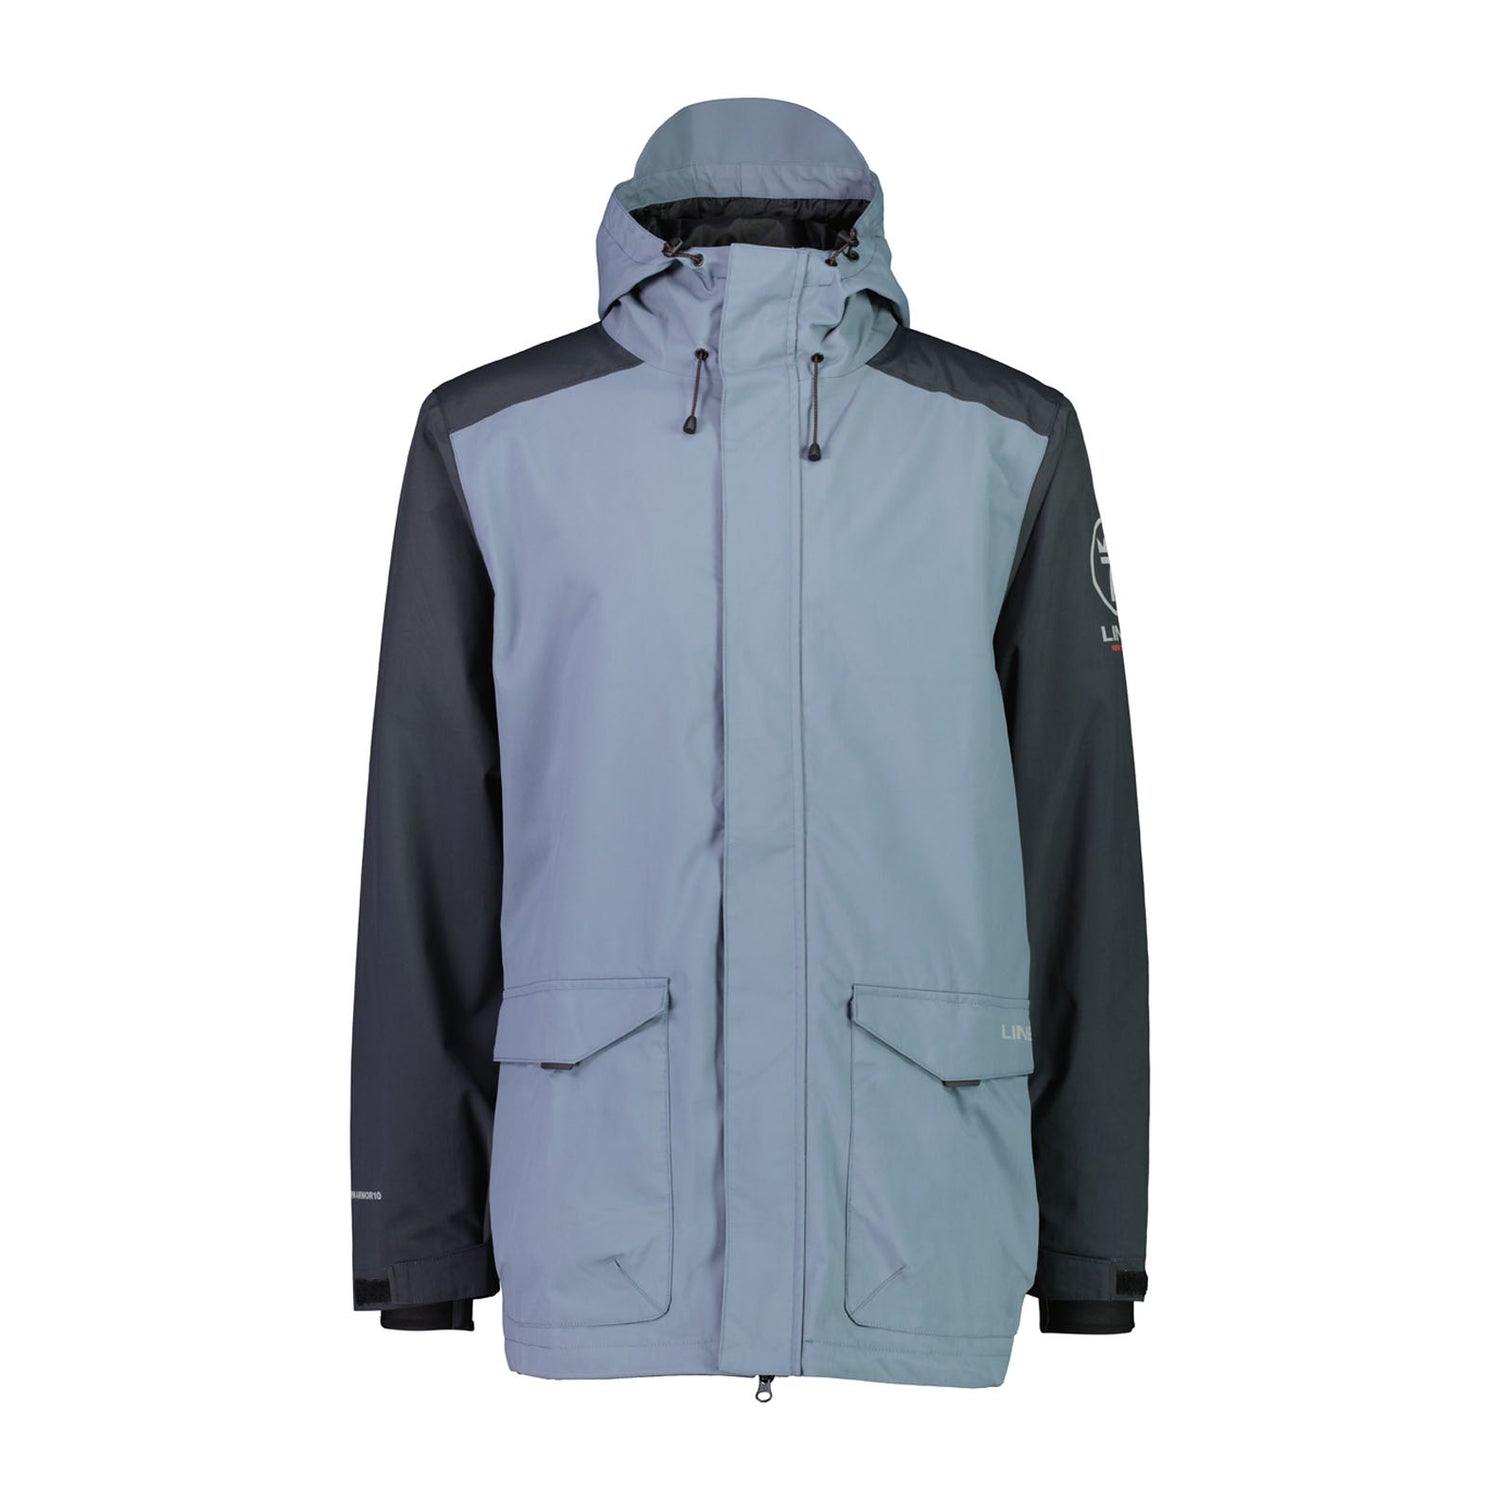 Line 7 Storm Armour10 Waterproof 2 layer Jacket